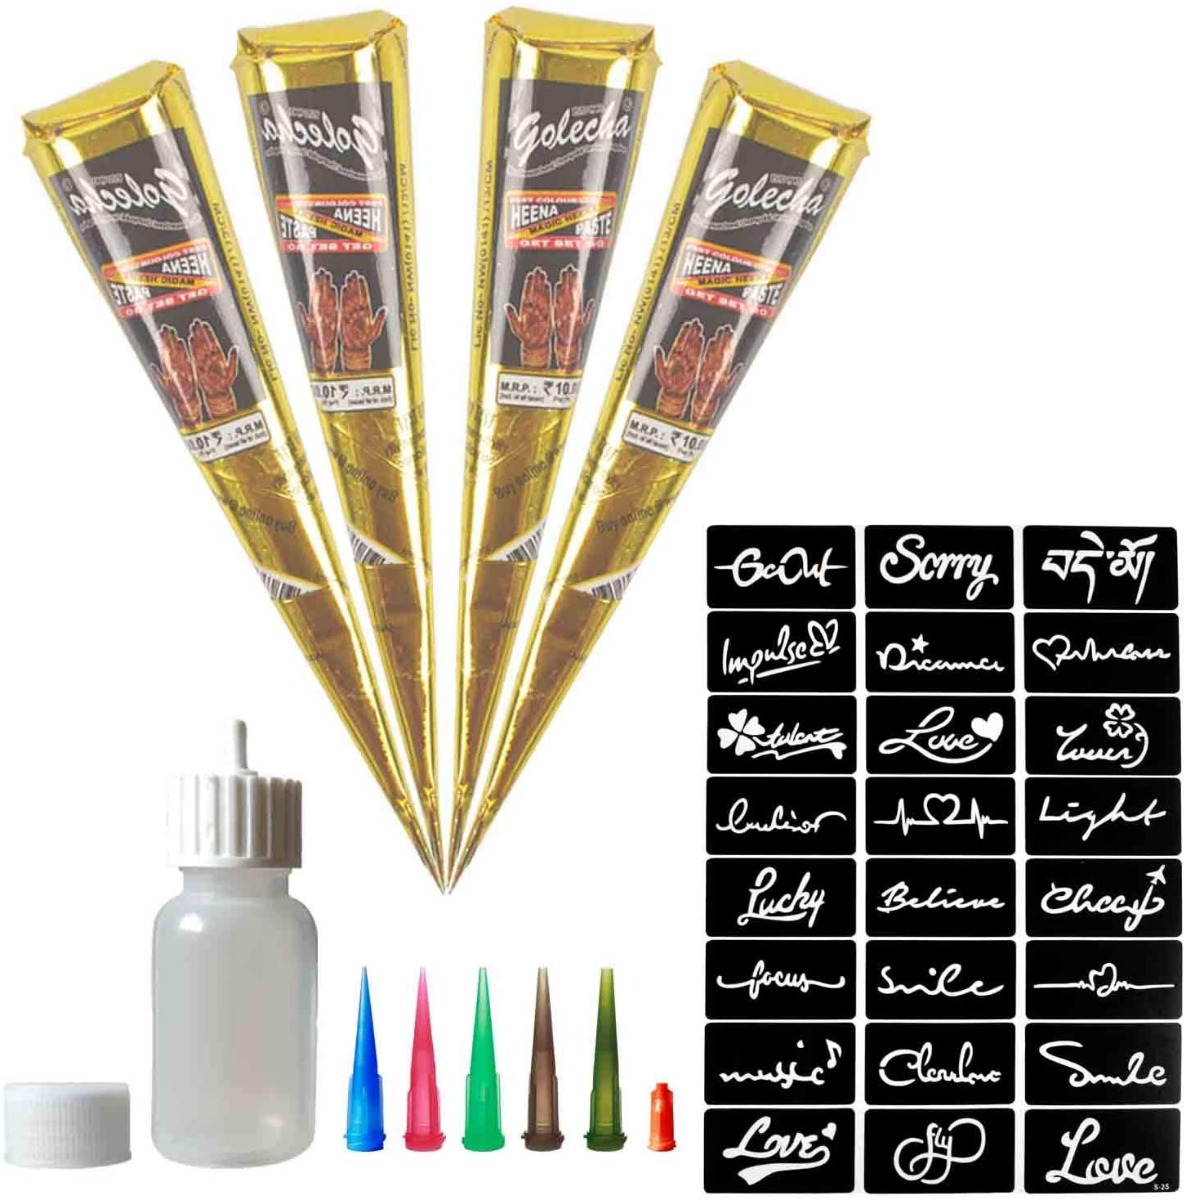 4 Pack Temporary Henna Tattoo Kit India Painting Tattoo Paste Cone, Indian Body Art Painting Drawing, Black Body-Painted Stickers DIY Tattoos 24 Free Stencil for Kids Adults-0